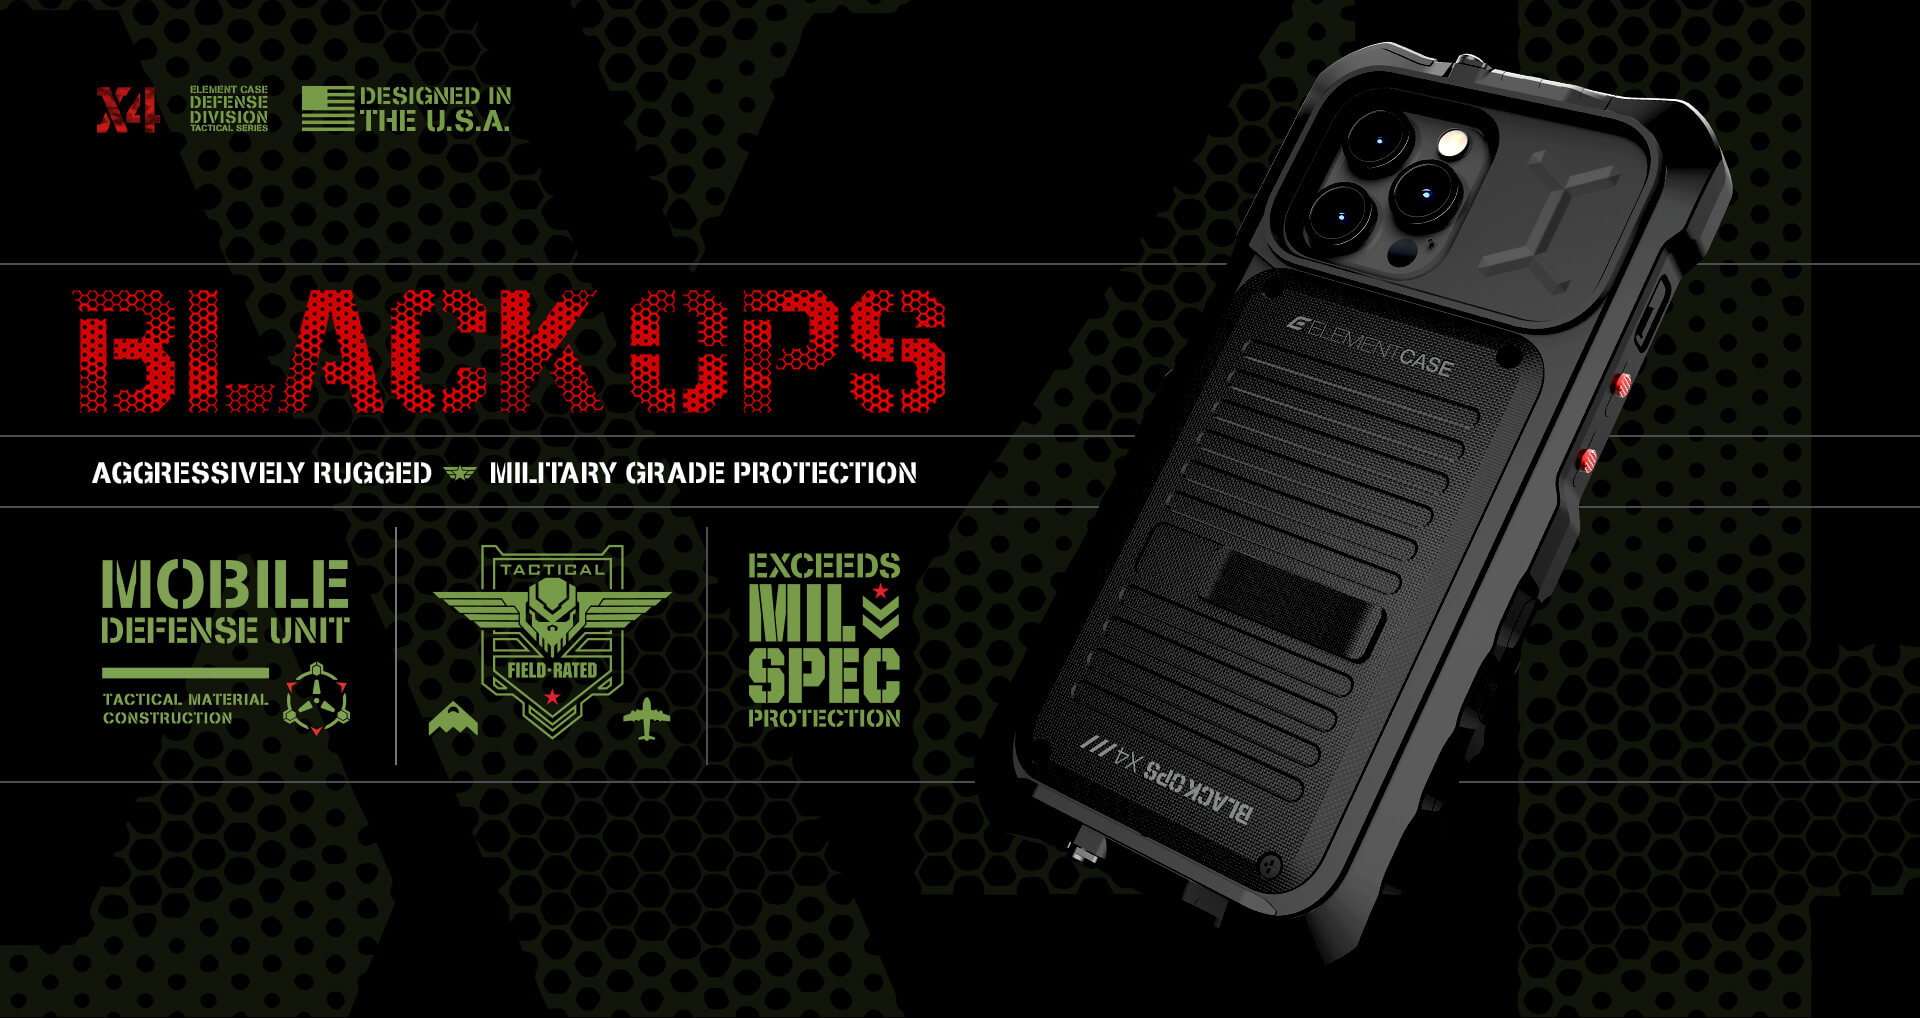 Element Case Black Ops for iPhone 13 Pro Max